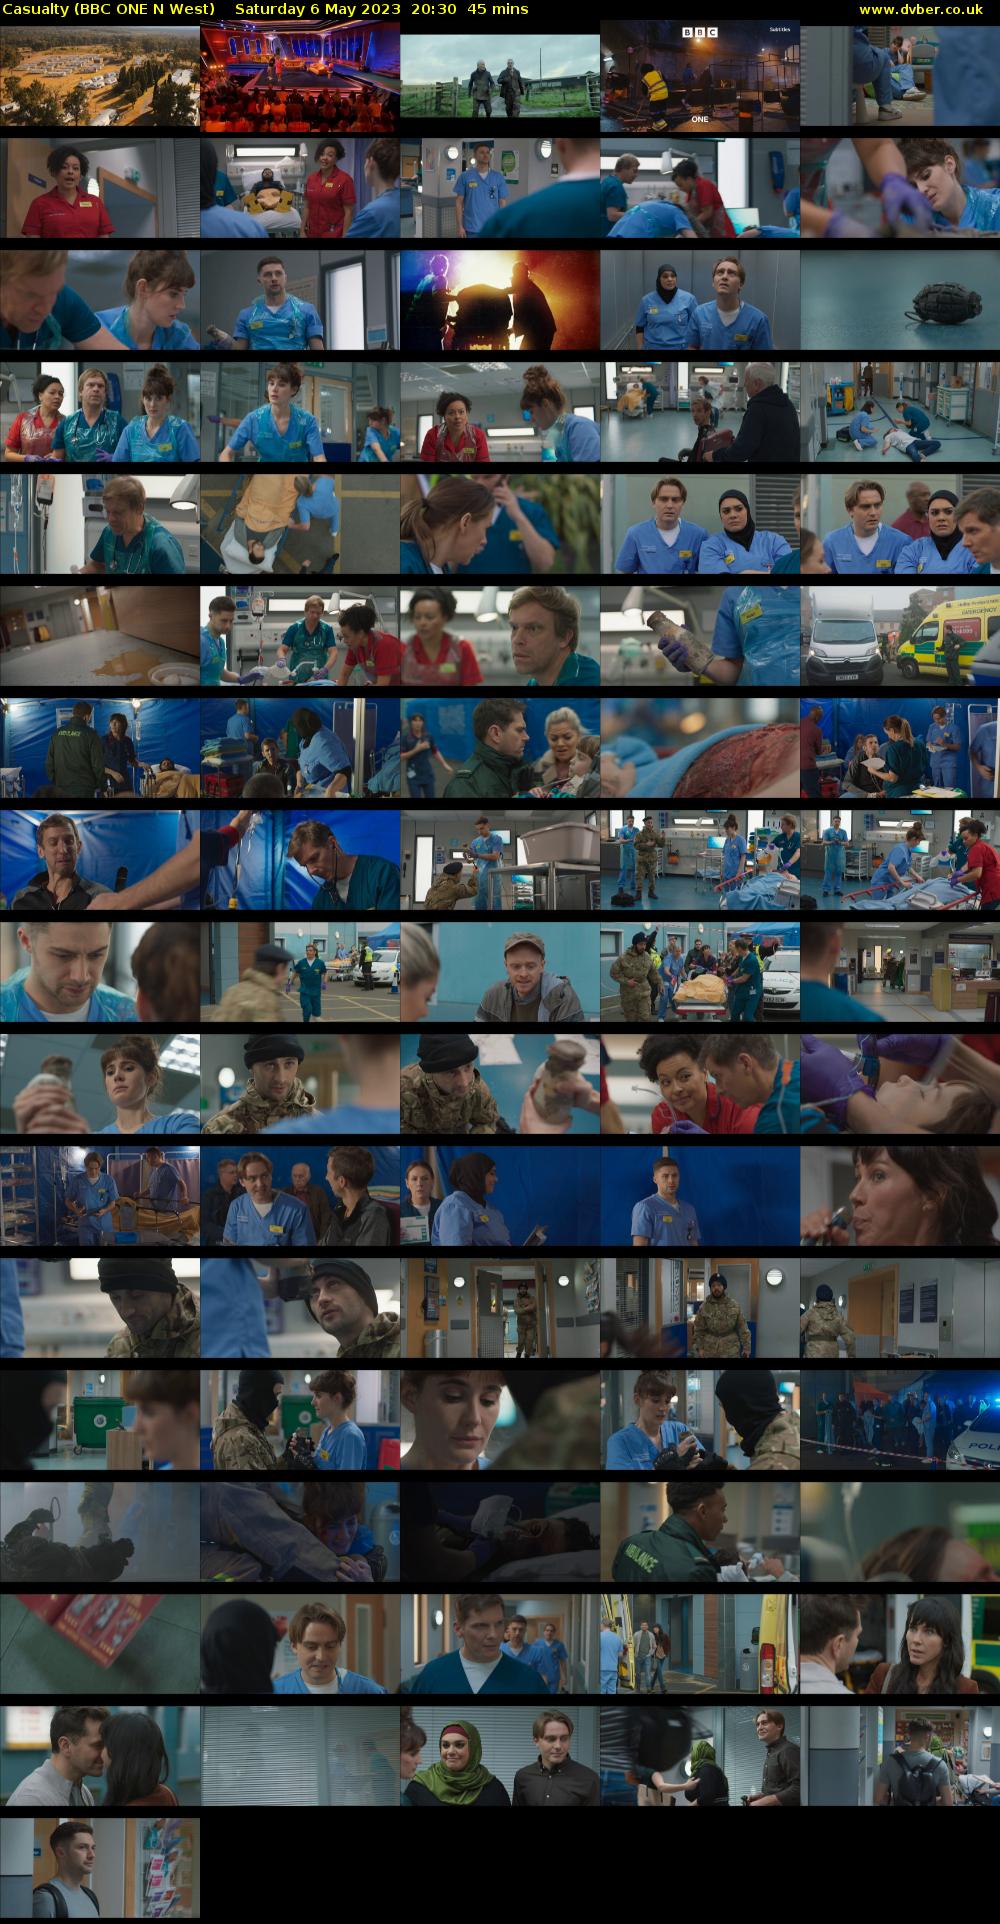 Casualty (BBC ONE N West) Saturday 6 May 2023 20:30 - 21:15